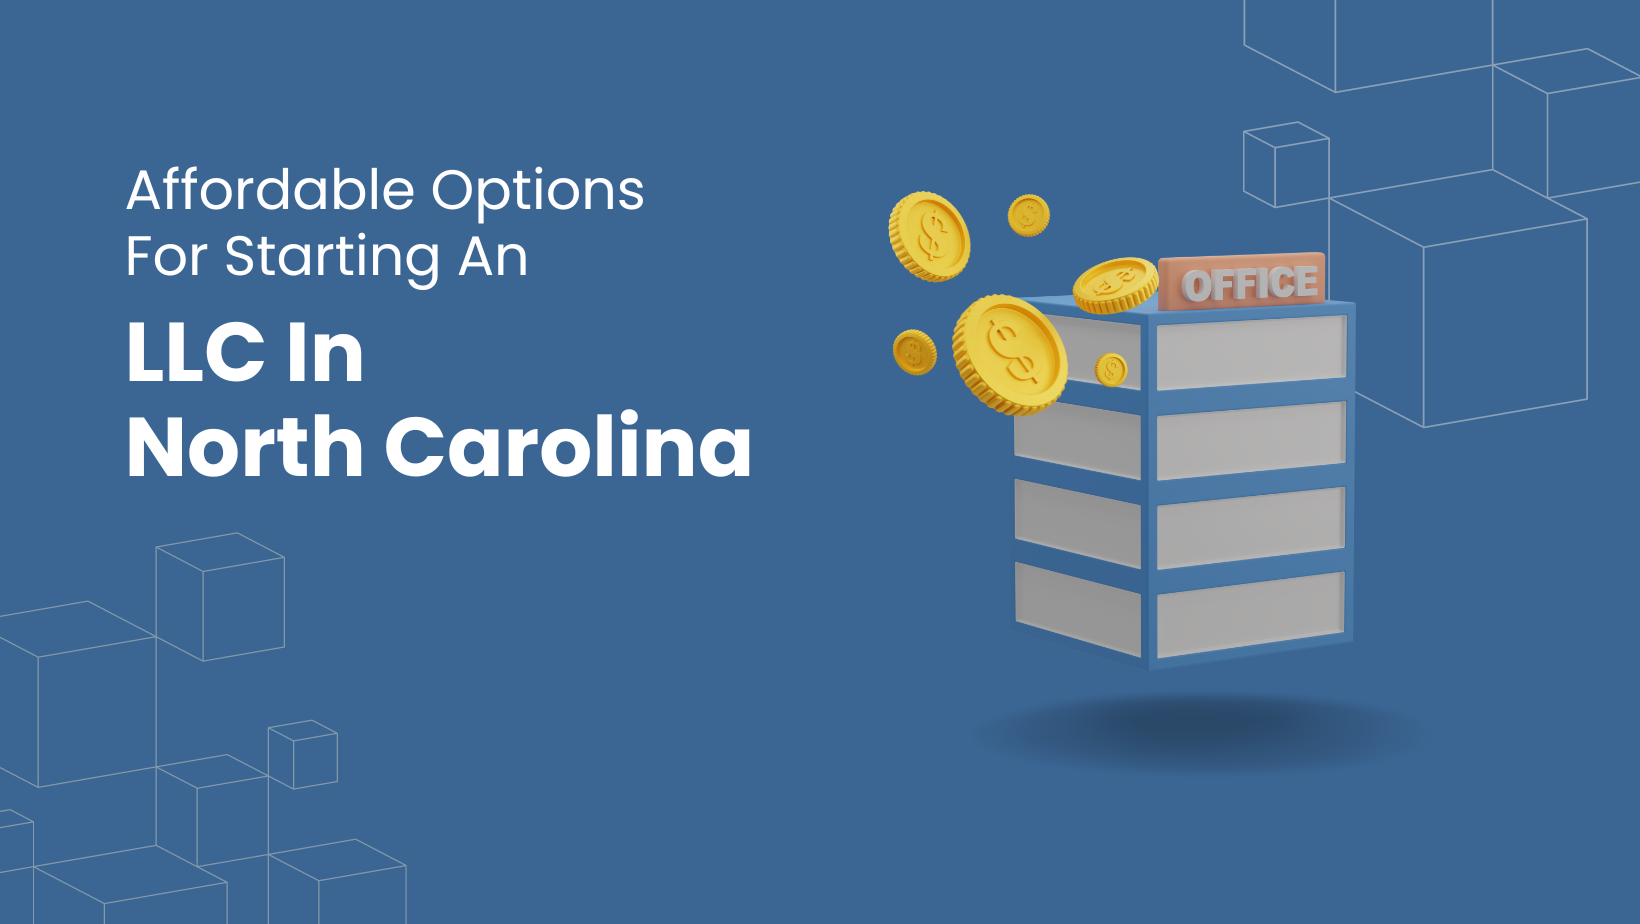 Affordable Options For Starting An LLC In North Carolina